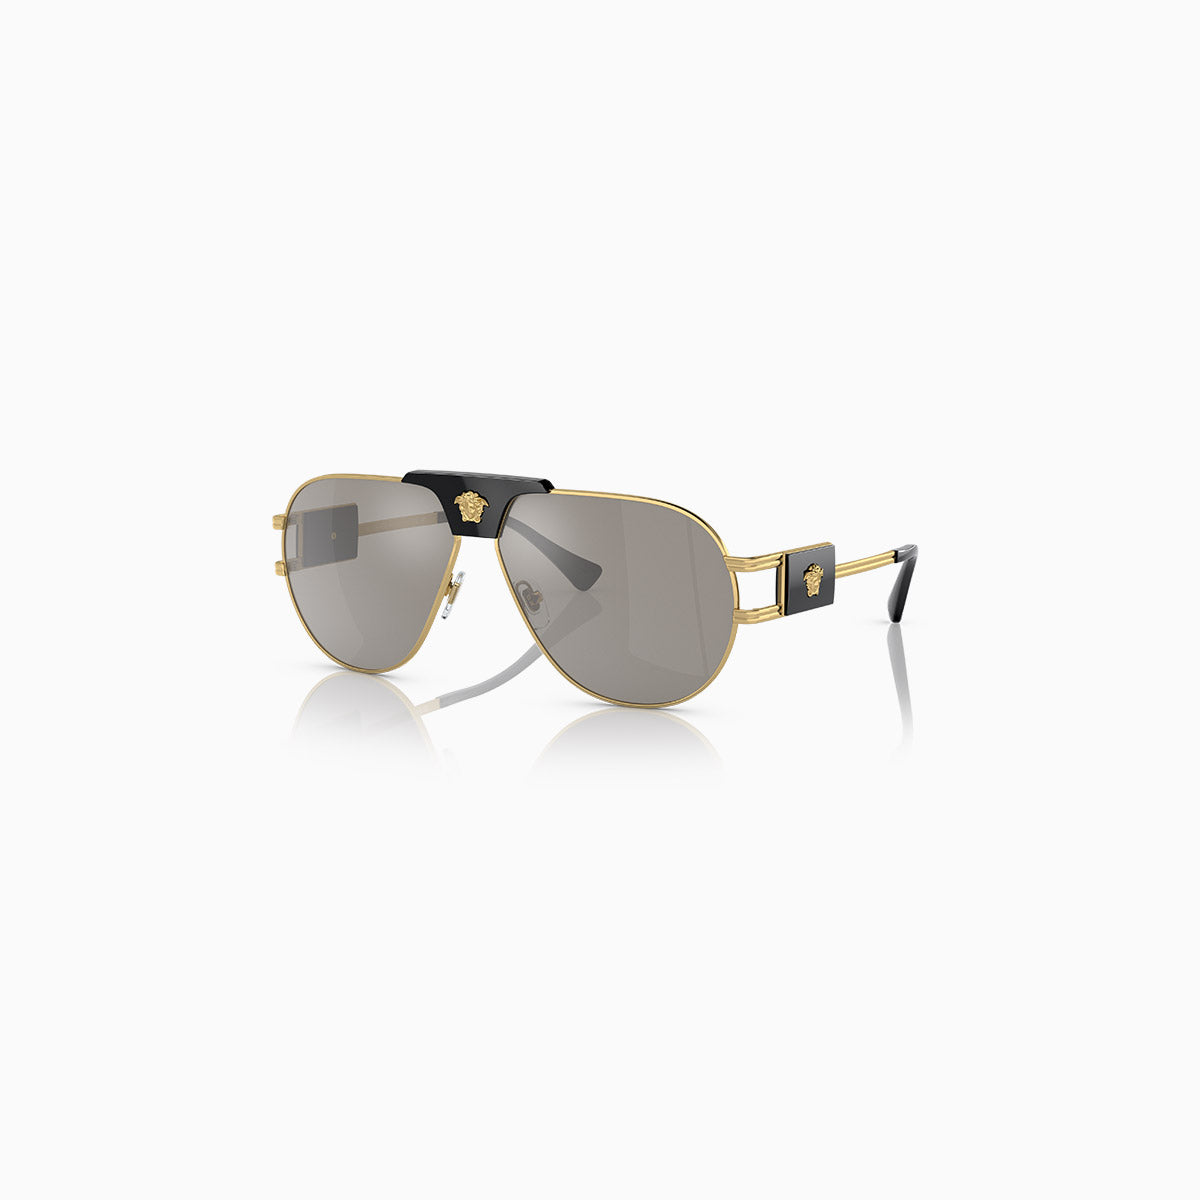 mens-versace-special-project-aviator-sunglasses-0ve2252-10026g